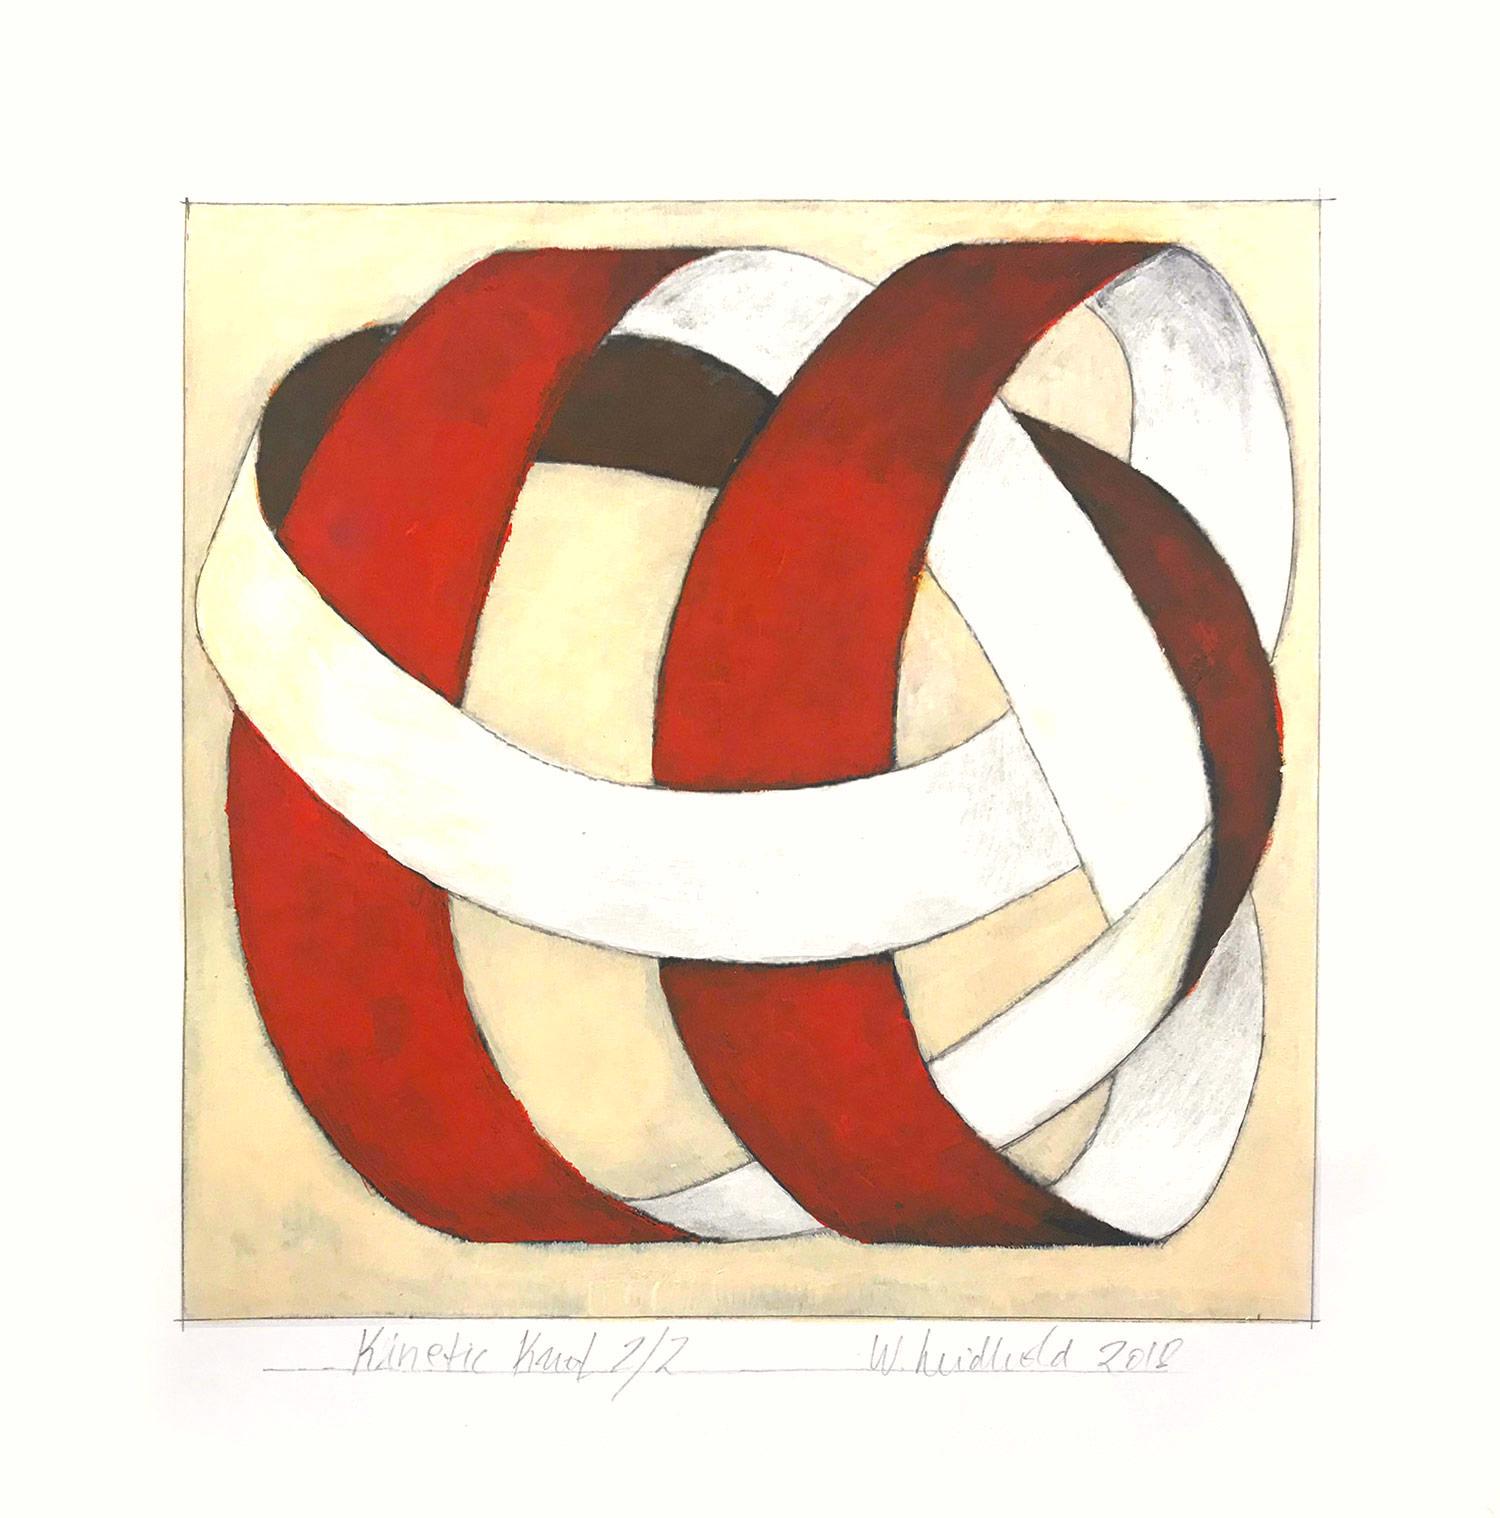 "Kinetic Knot No. 2/2" Abstract Representational Knot Painting Work on Paper